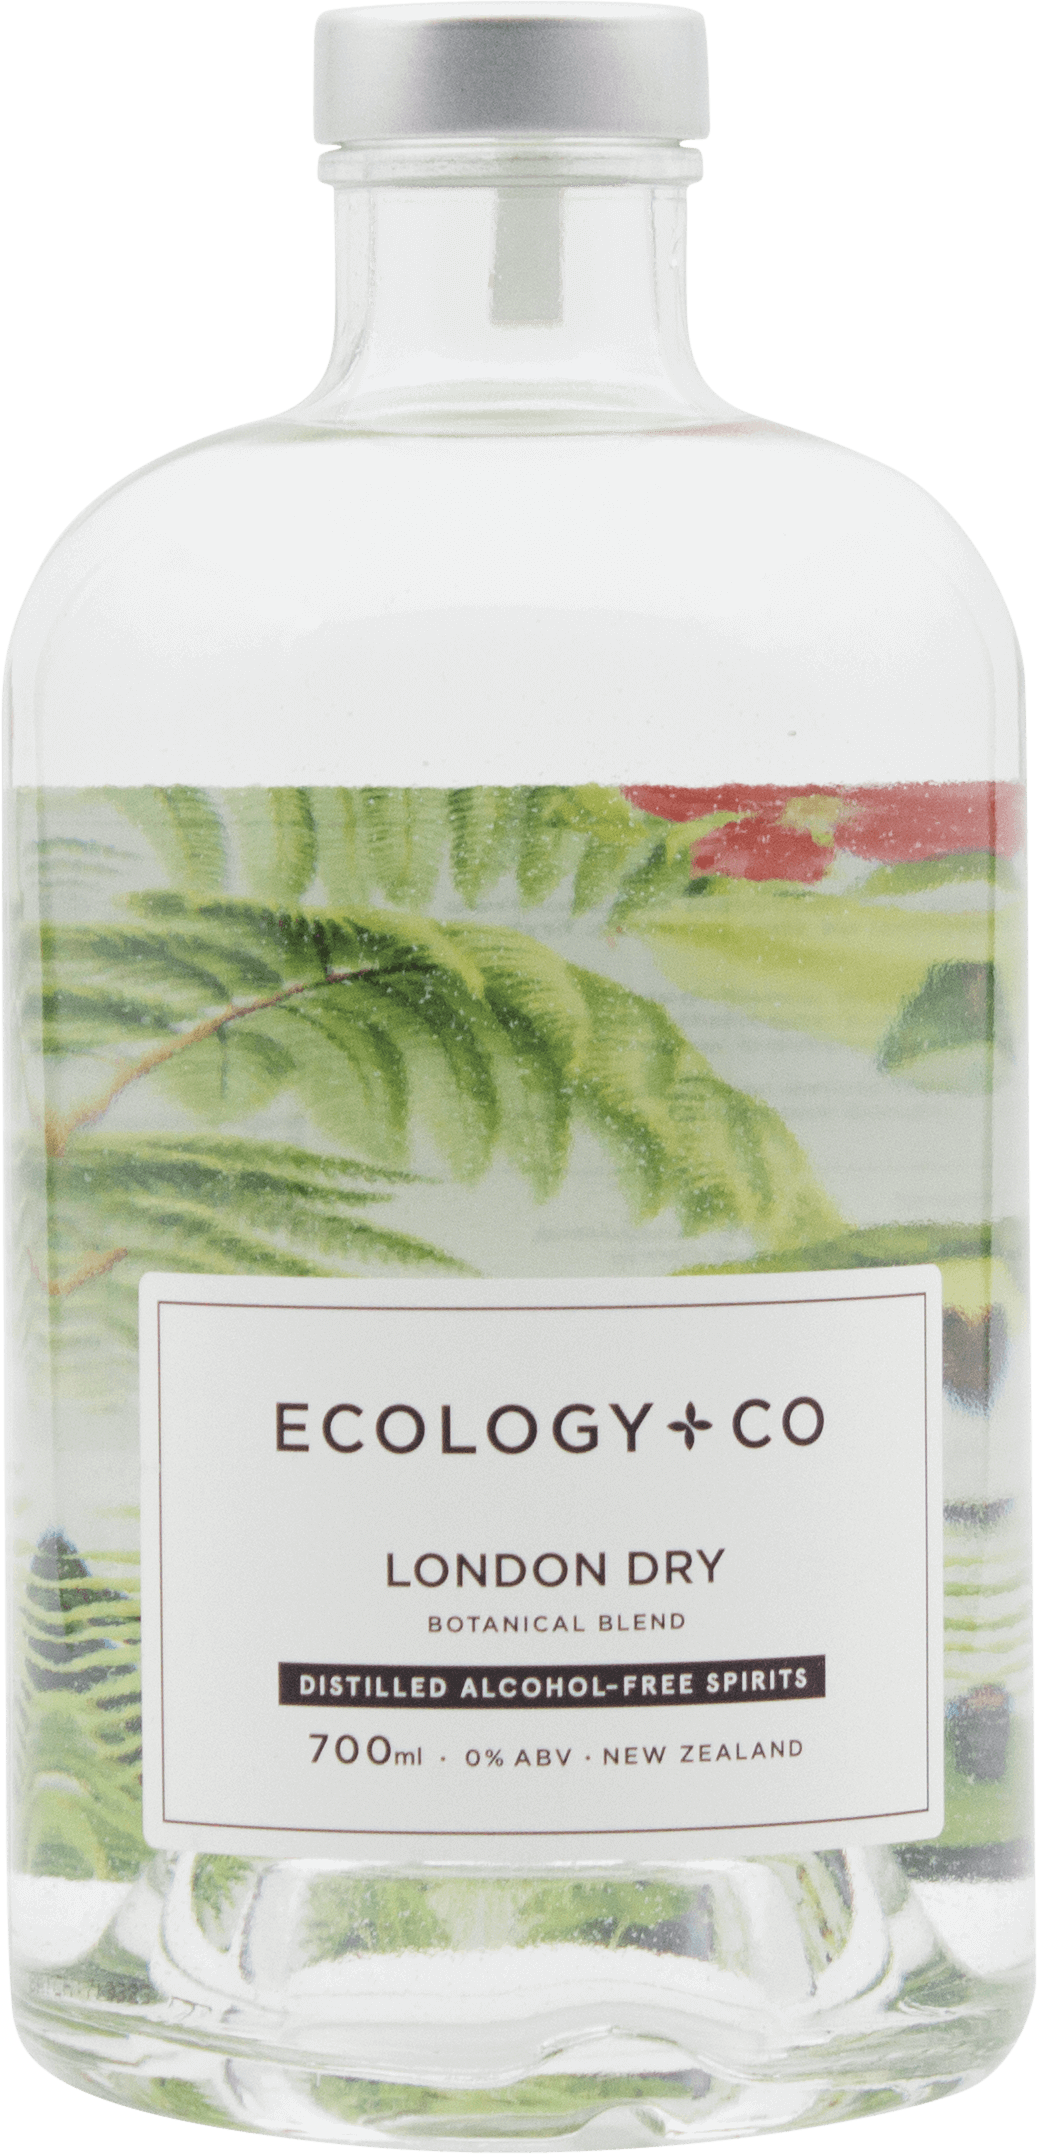 An image of a bottle of Ecology Co London Dry Alcohol-Free Spirit produced locally here in New Zealand